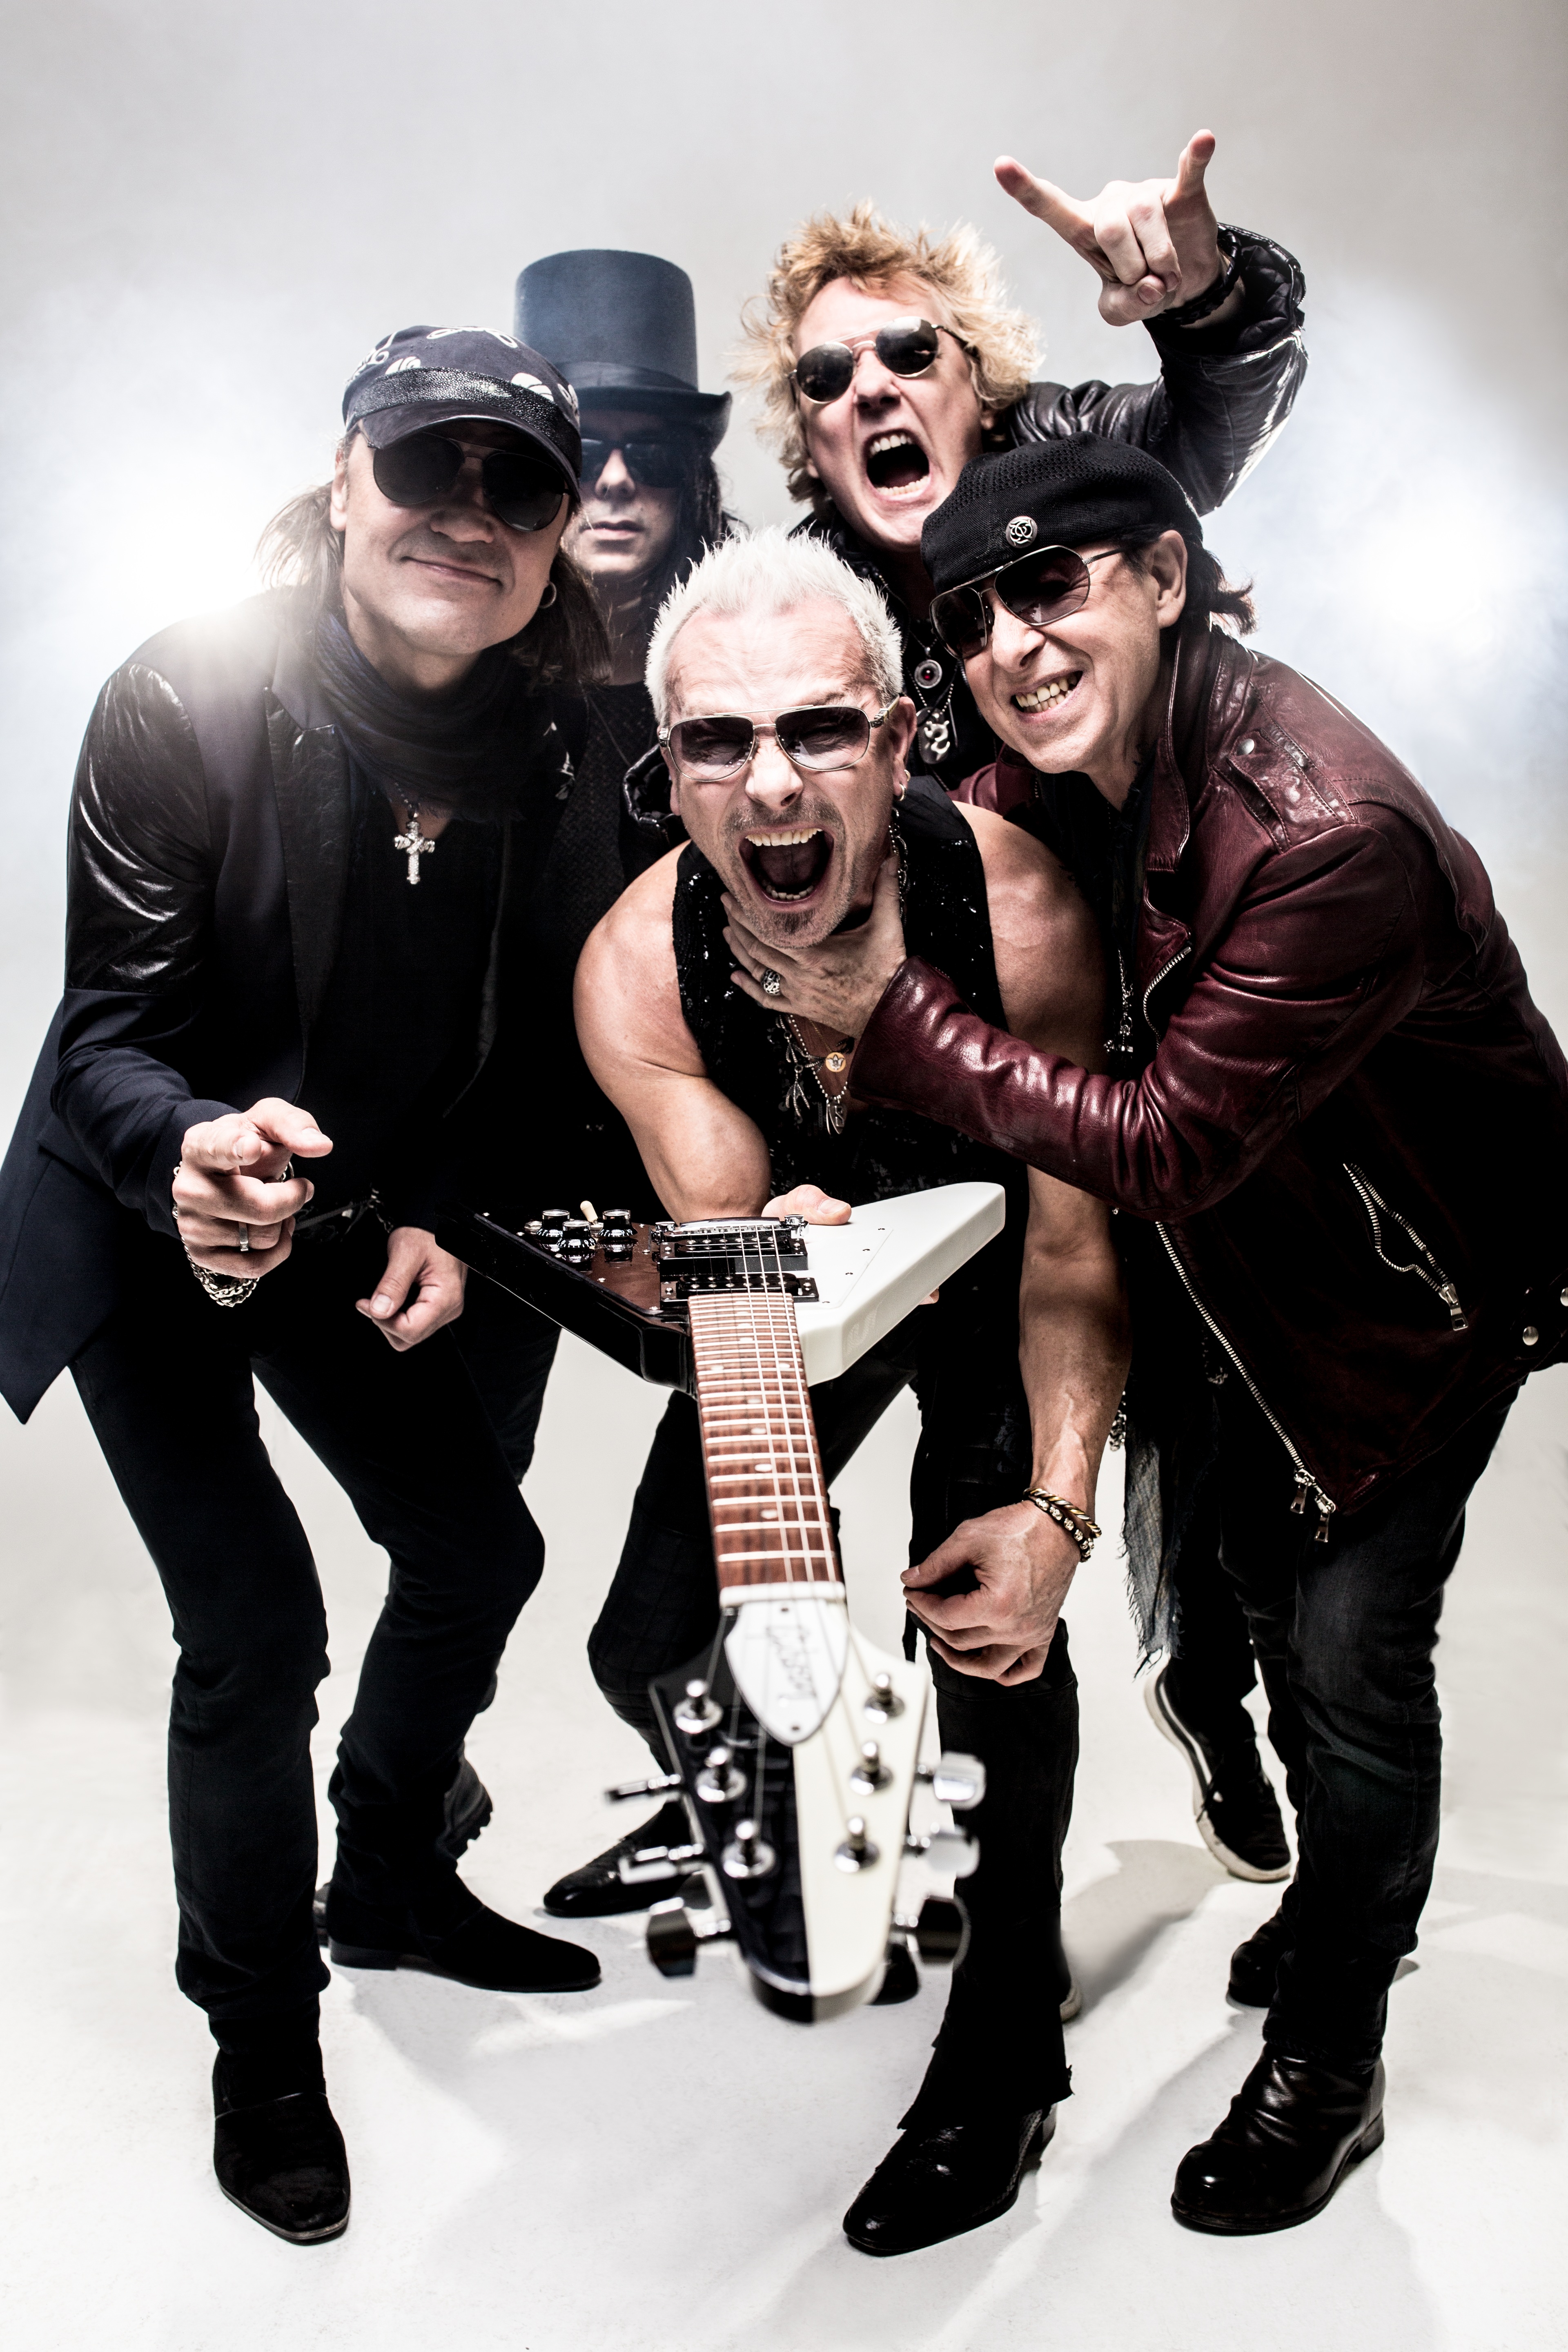 HD Quality Wallpaper | Collection: Music, 3840x5760 Scorpions